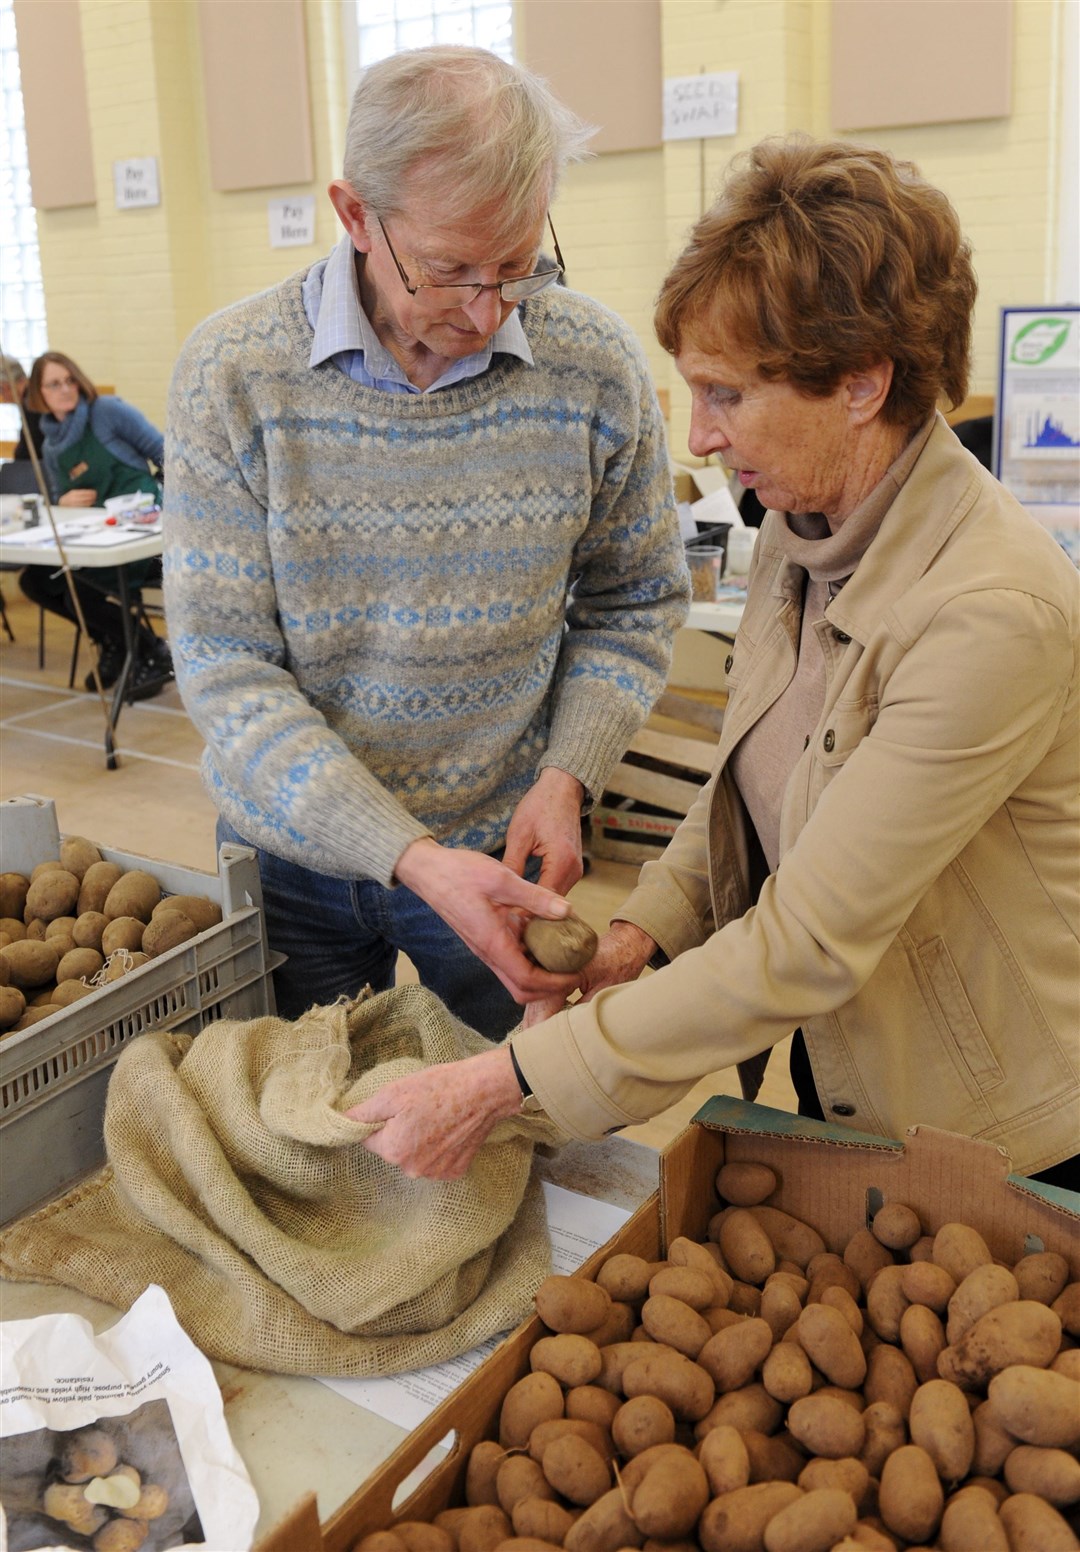 Black Isle Transition potato days and seed swaps have become eagerly anticipated dates.